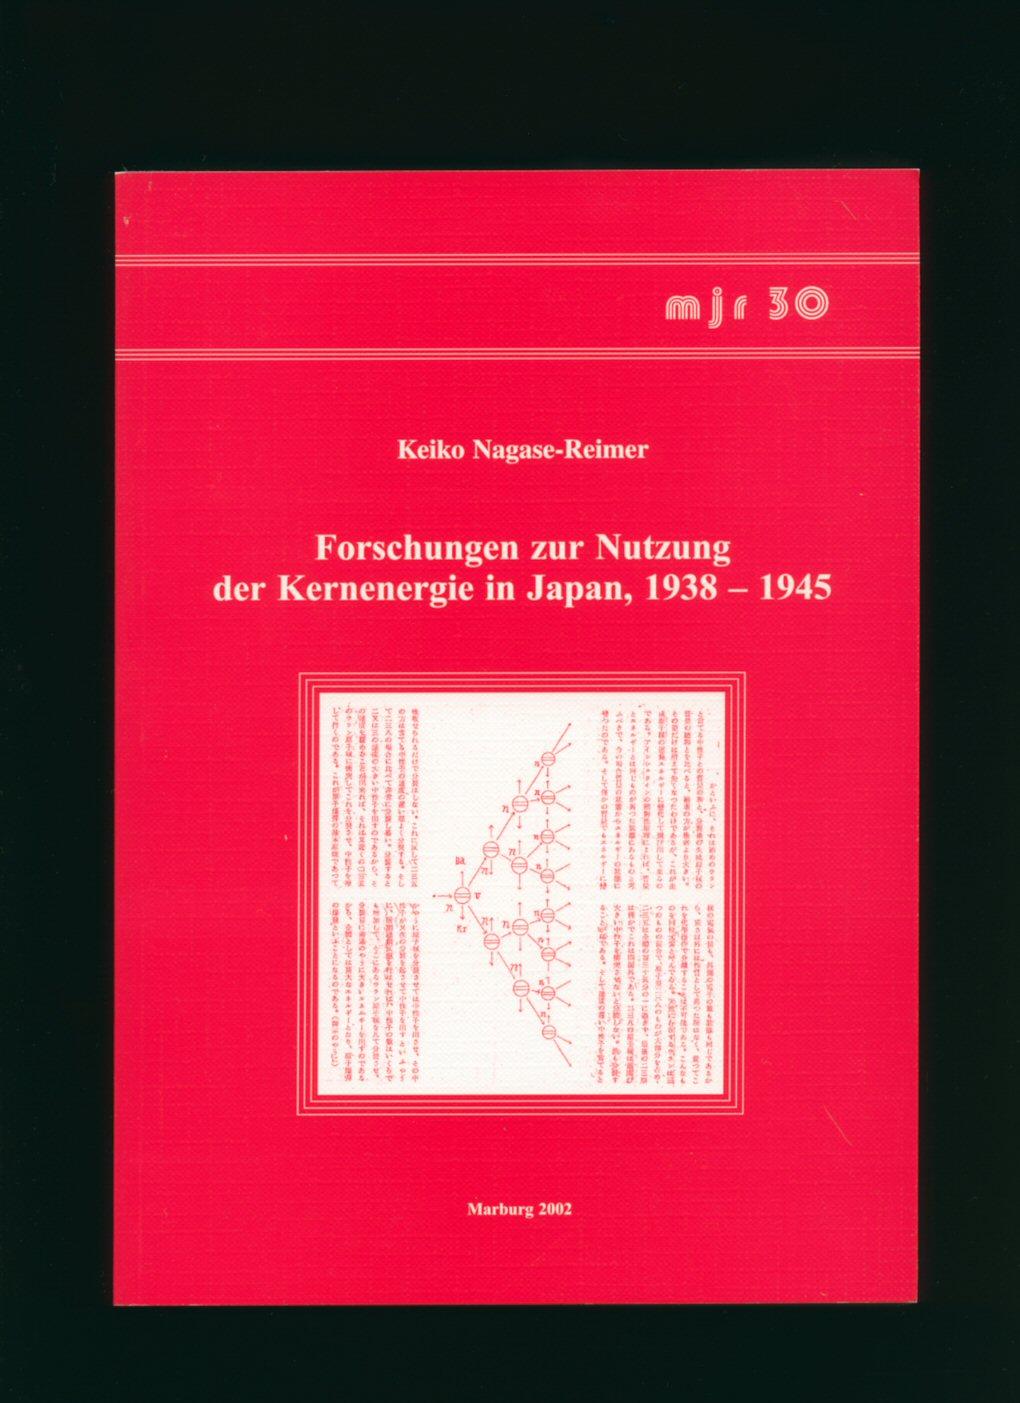 Forschungen zur Nutzung der Kernenergie in Japan, 1938-1945 [Research on the use of nuclear energy in Japan, 1938-1945] - Nagase-Reimer, Keiko